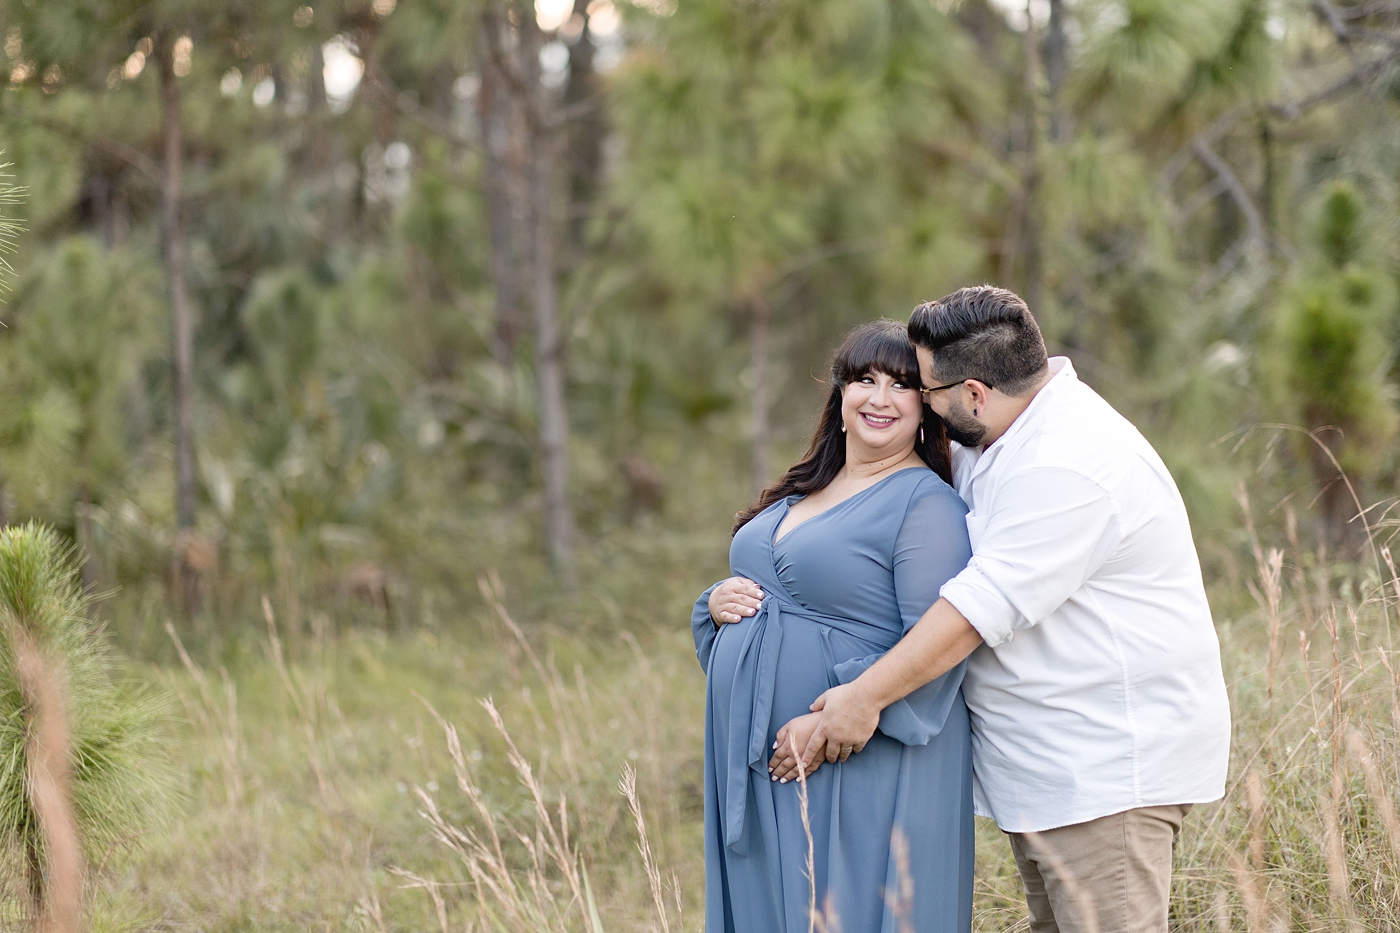 Mom and dad embrace during Miami maternity session. Photo by South Florida Maternity Photographer Ivanna Vidal Photography.